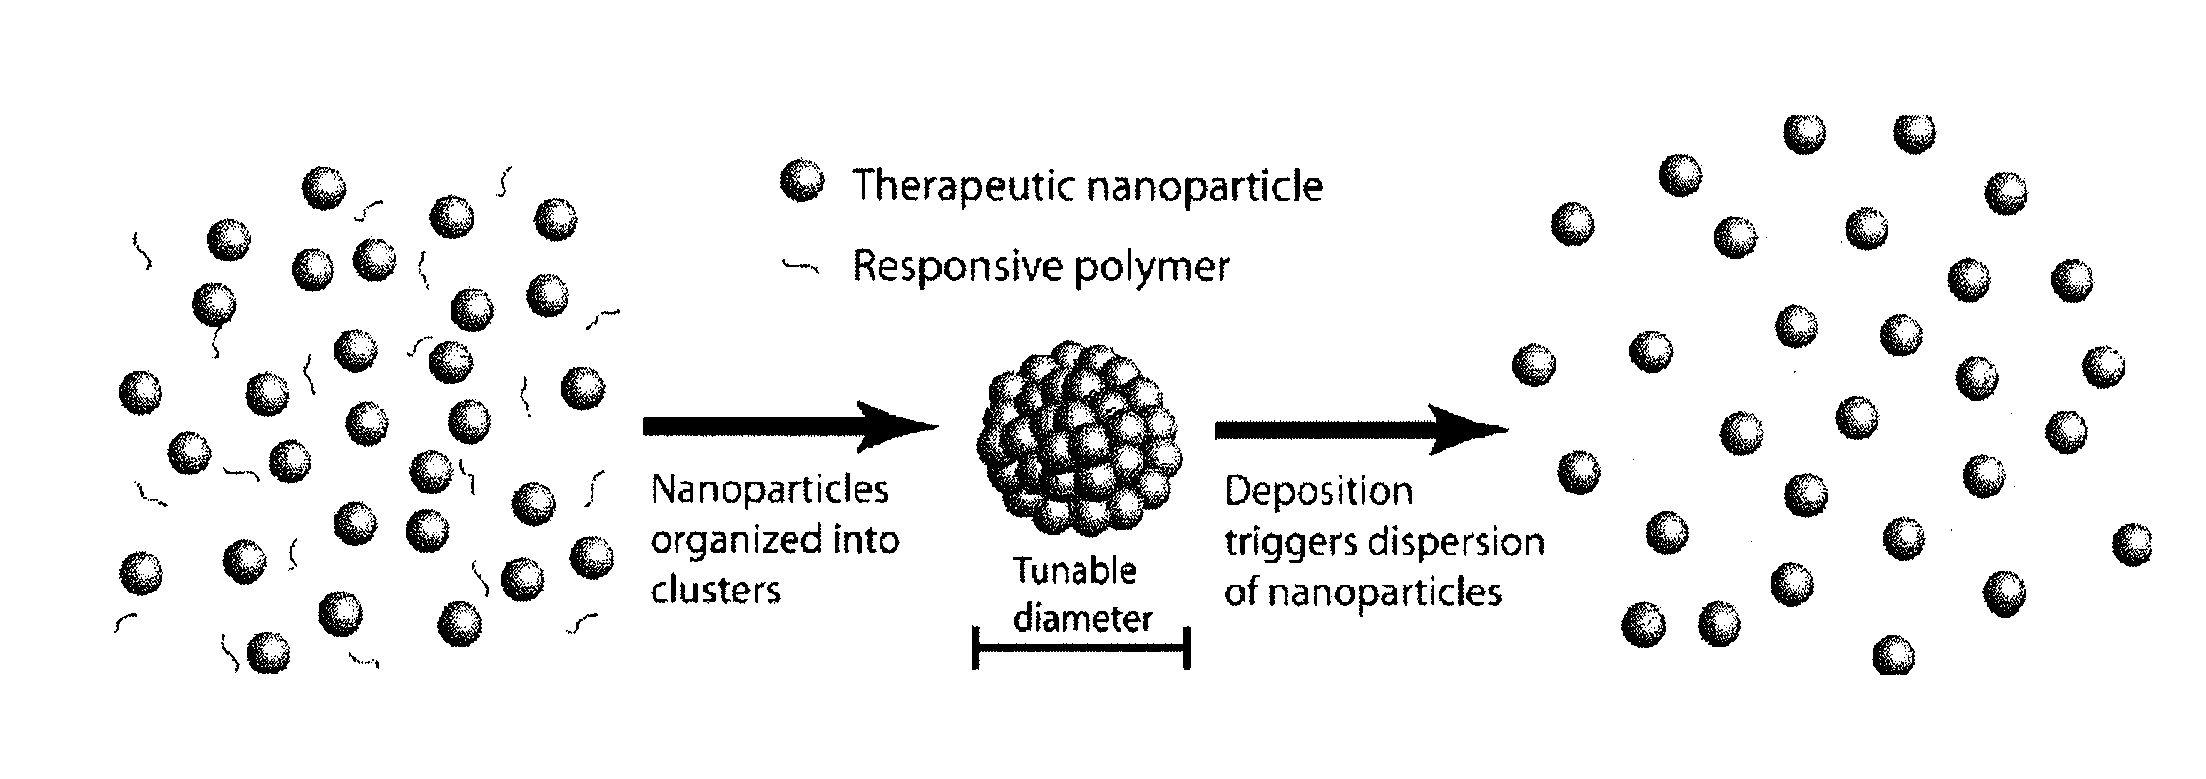 Nanoclusters for delivery of therapeutics